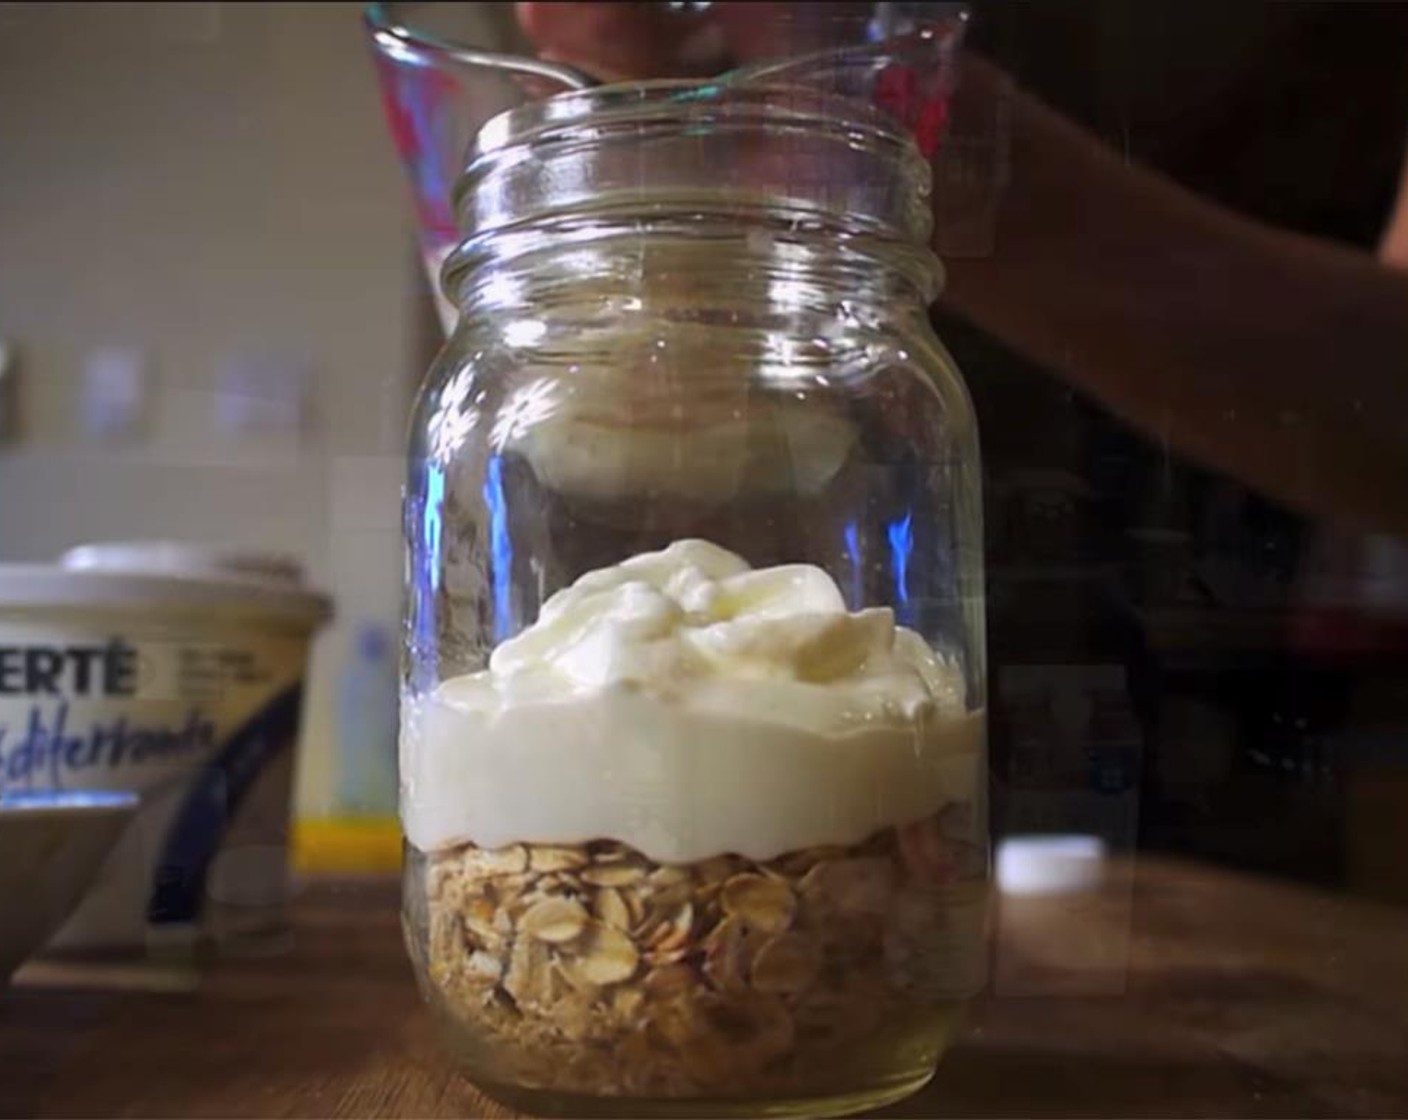 step 1 In a jar, or any container with a lid, add the Raw Old Fashioned Rolled Oats (1/2 cup), Plain Yogurt (1/2 cup), Almond Milk (2/3 cup), Honey (1 Tbsp), Ground Cinnamon (1/4 tsp), Vanilla Extract (1/4 tsp), and Salt (1 pinch) Put lid on, and shake to mix well.